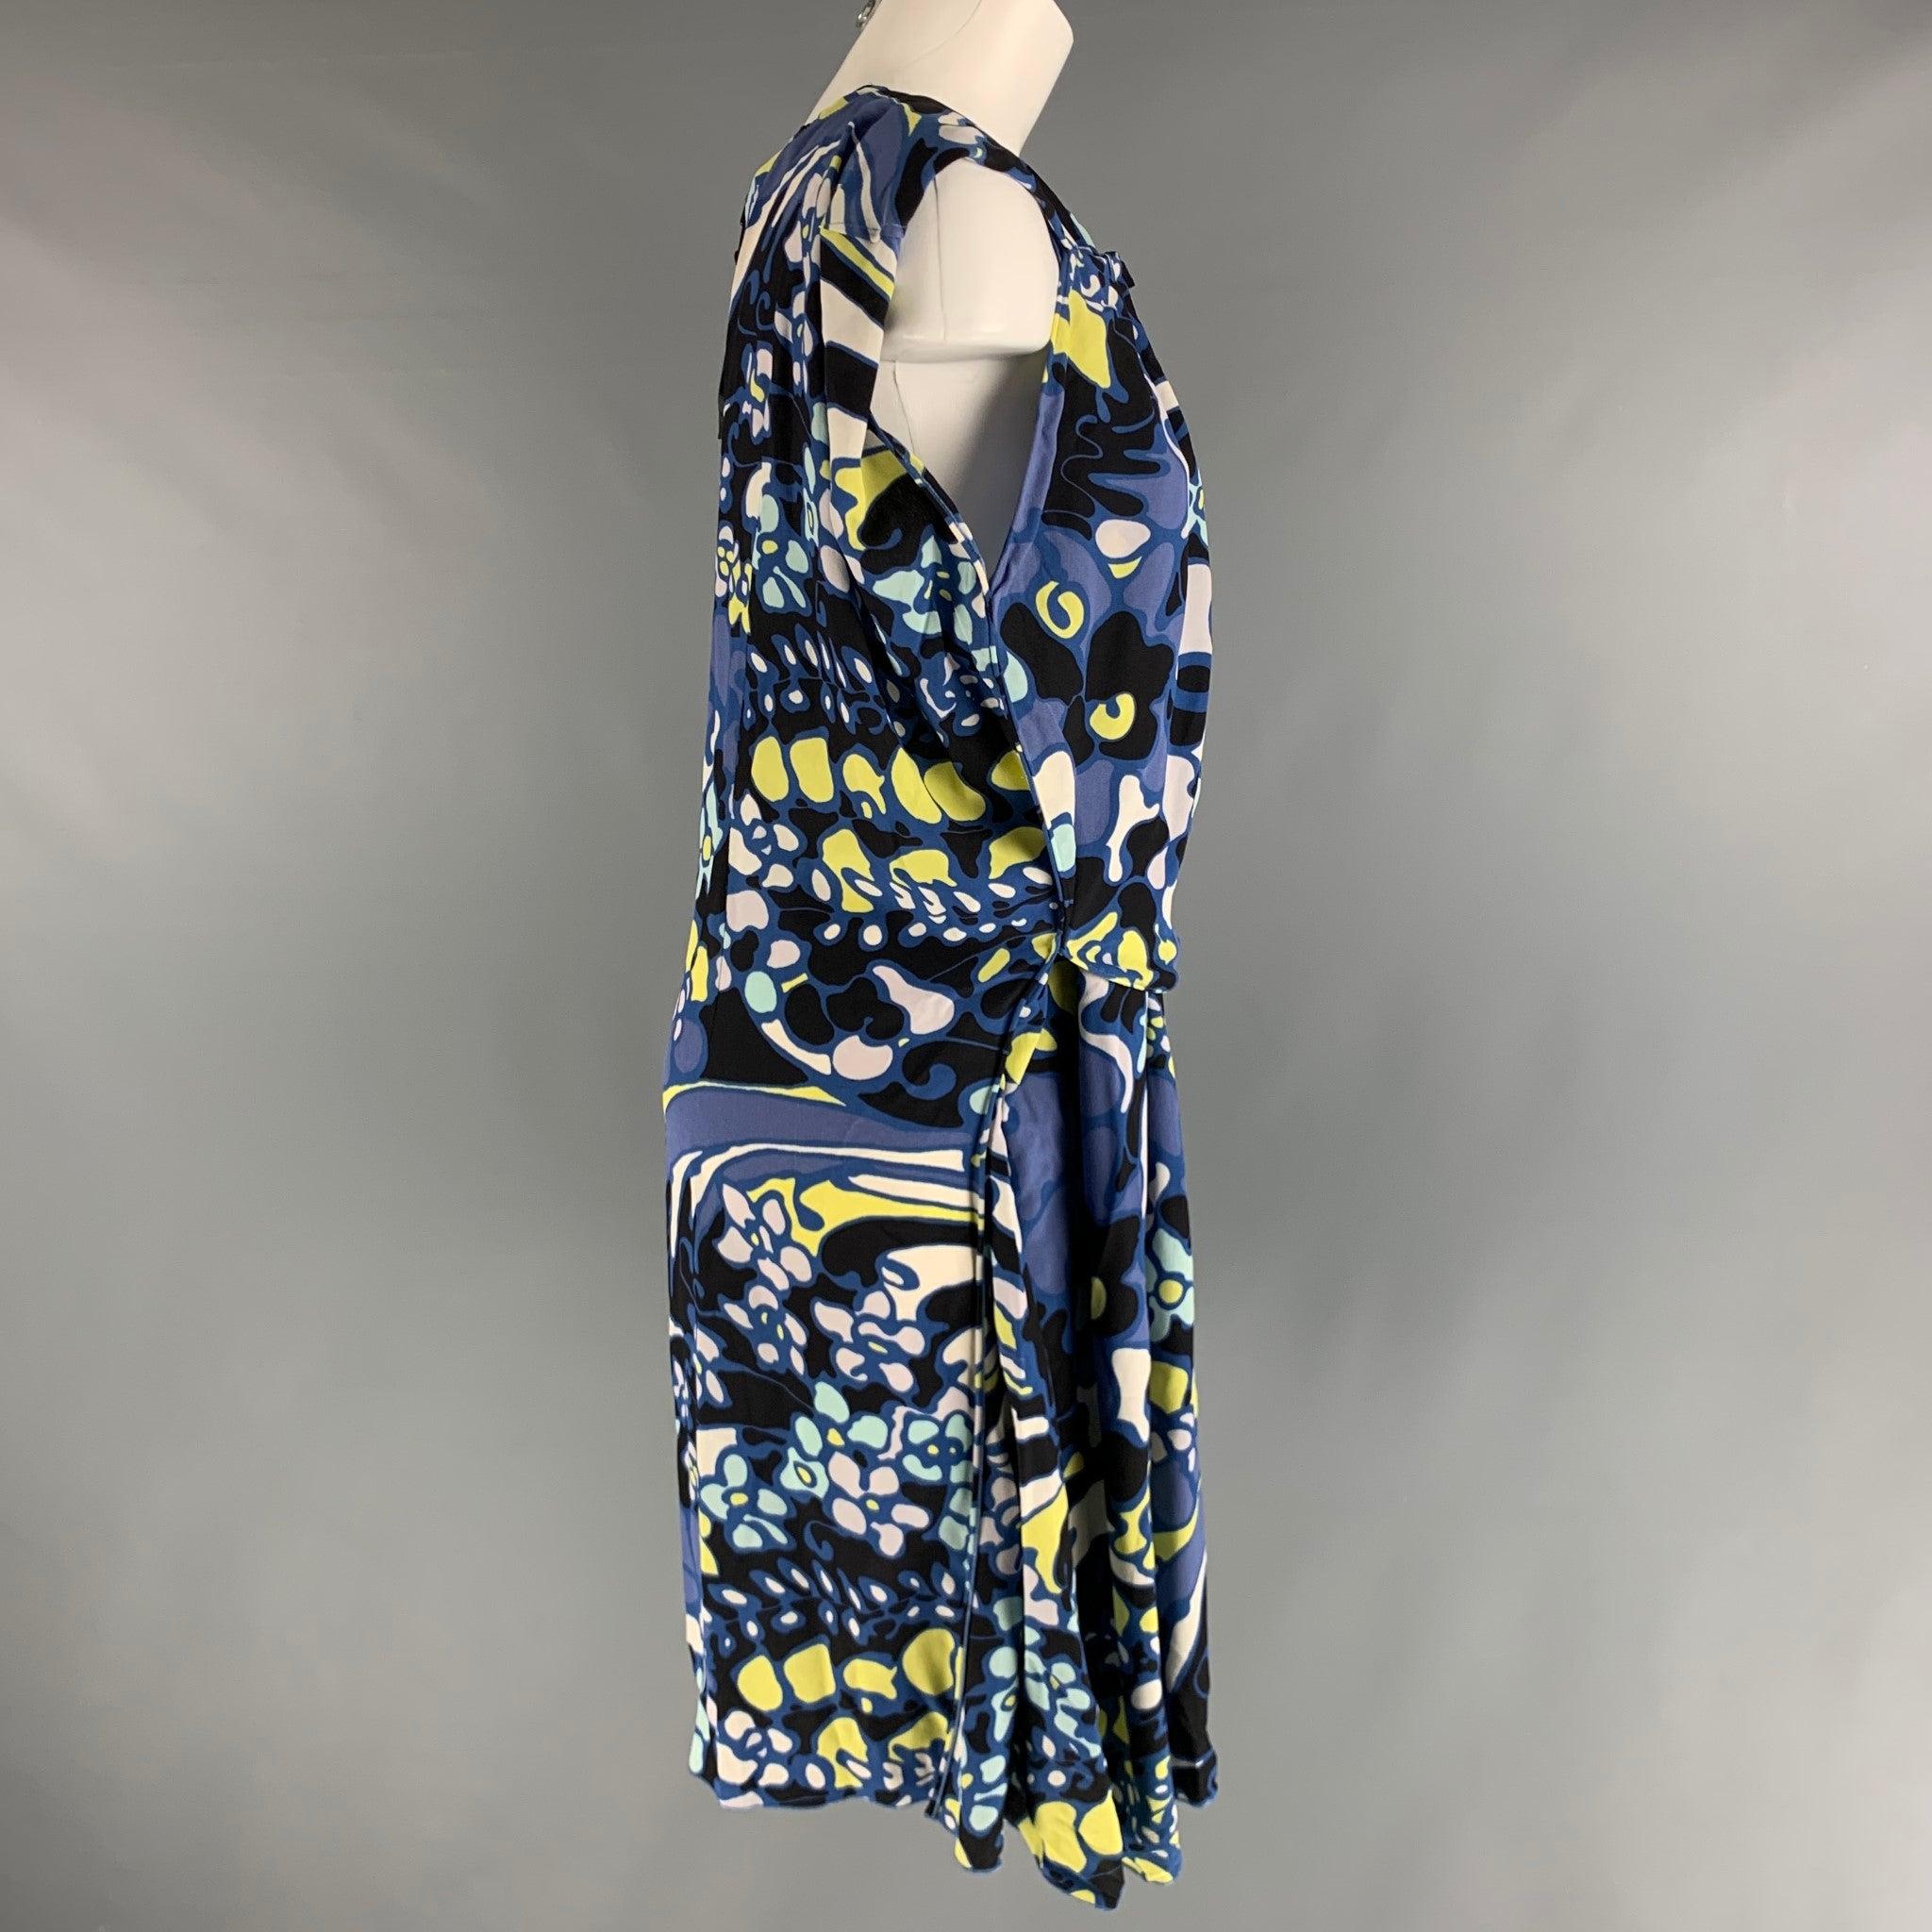 MARNI dress comes in a white, yellow and blue woven material featuring a rushed detail, loose fit, shift design, and a sleeveless style. Made in Italy.Very Good Pre-Owned Condition. Moderate Marks. As-is. 

Marked:  38 

Measurements: 
 
Shoulder: